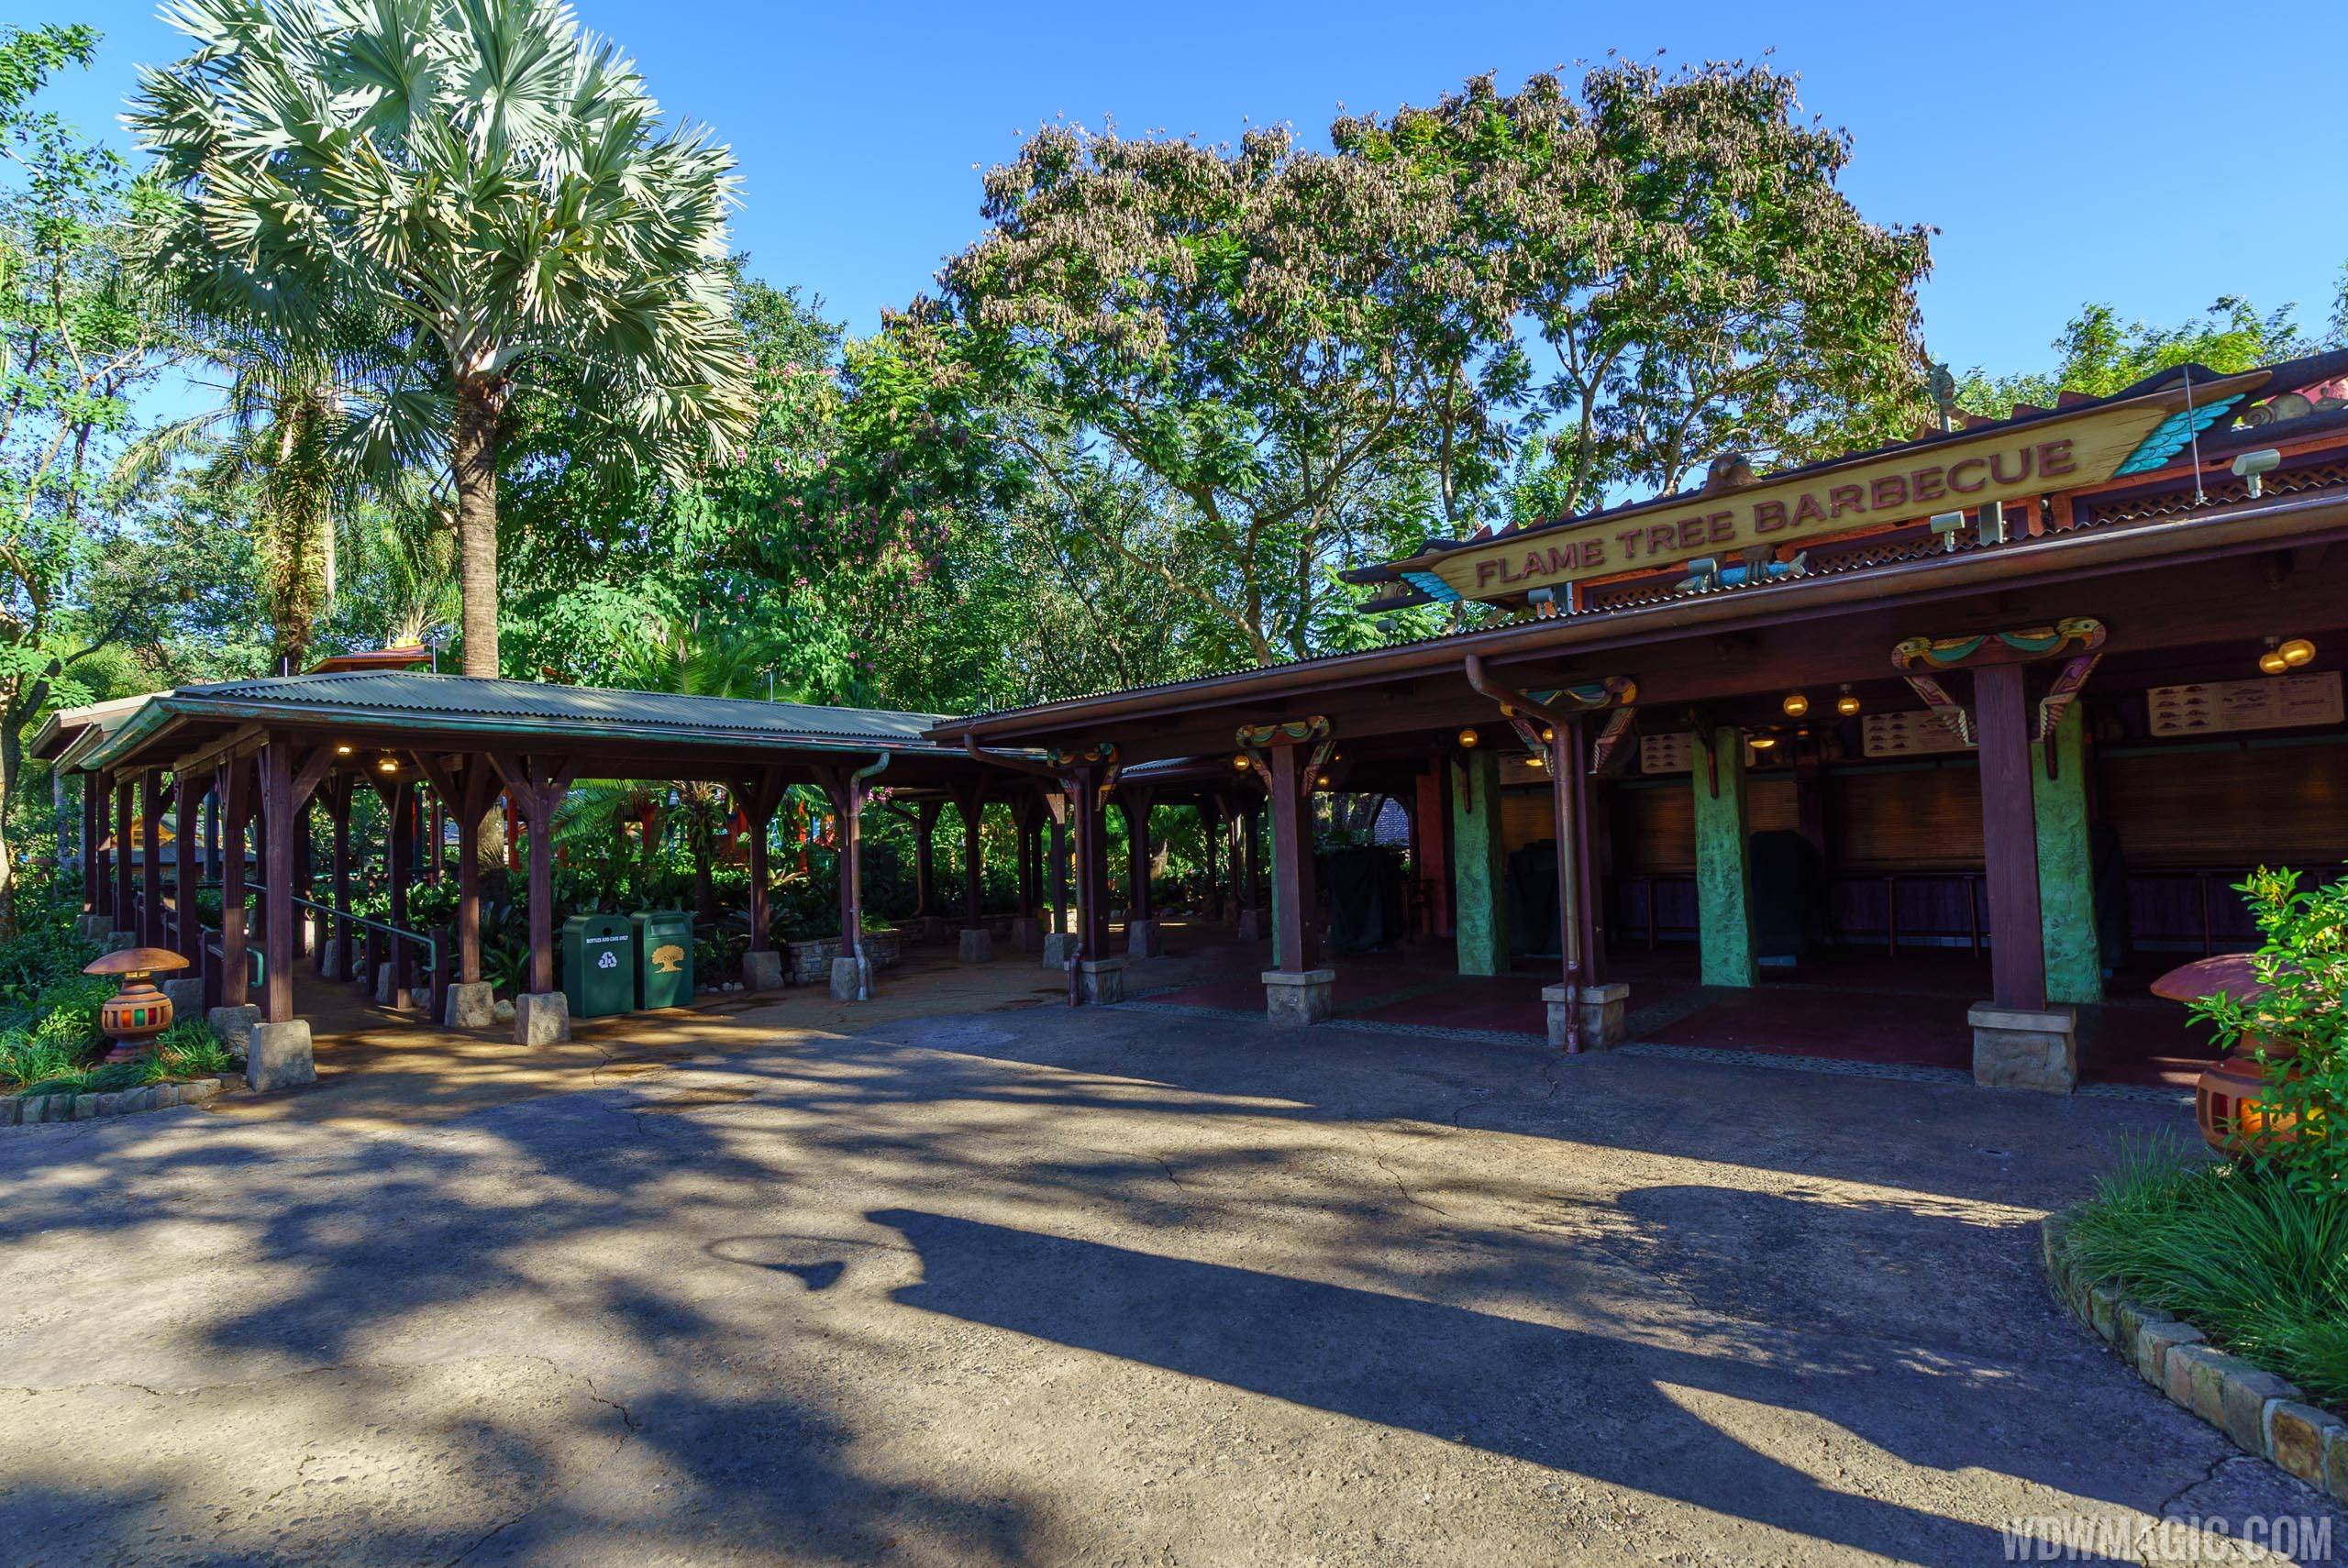 PHOTOS - Expanded seating and covered walkways at Flametree Barbecue